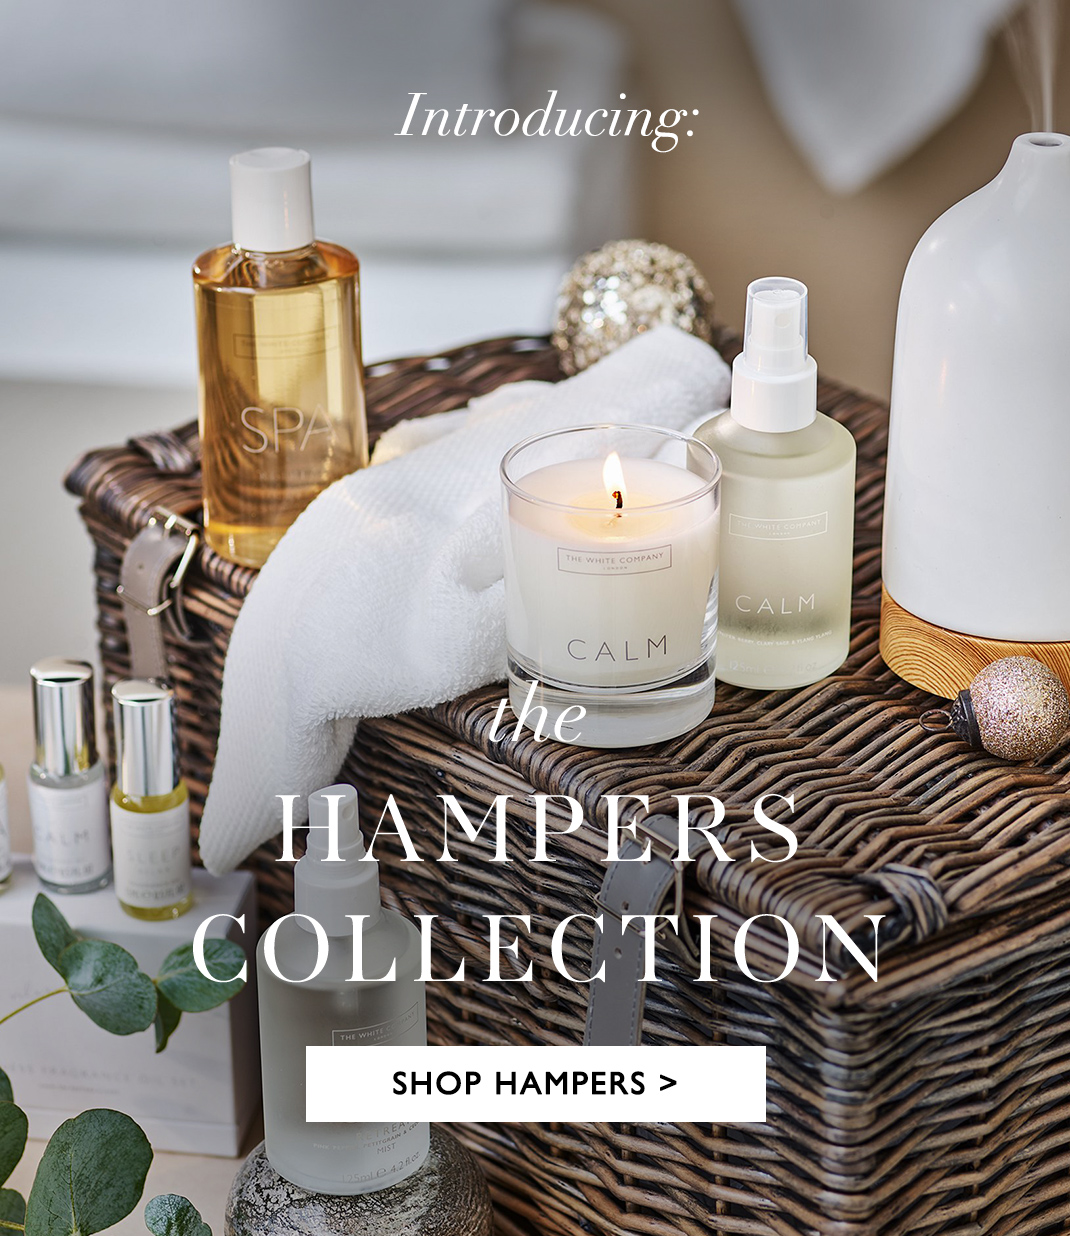 The Hampers Collection | SHOP HAMPERS